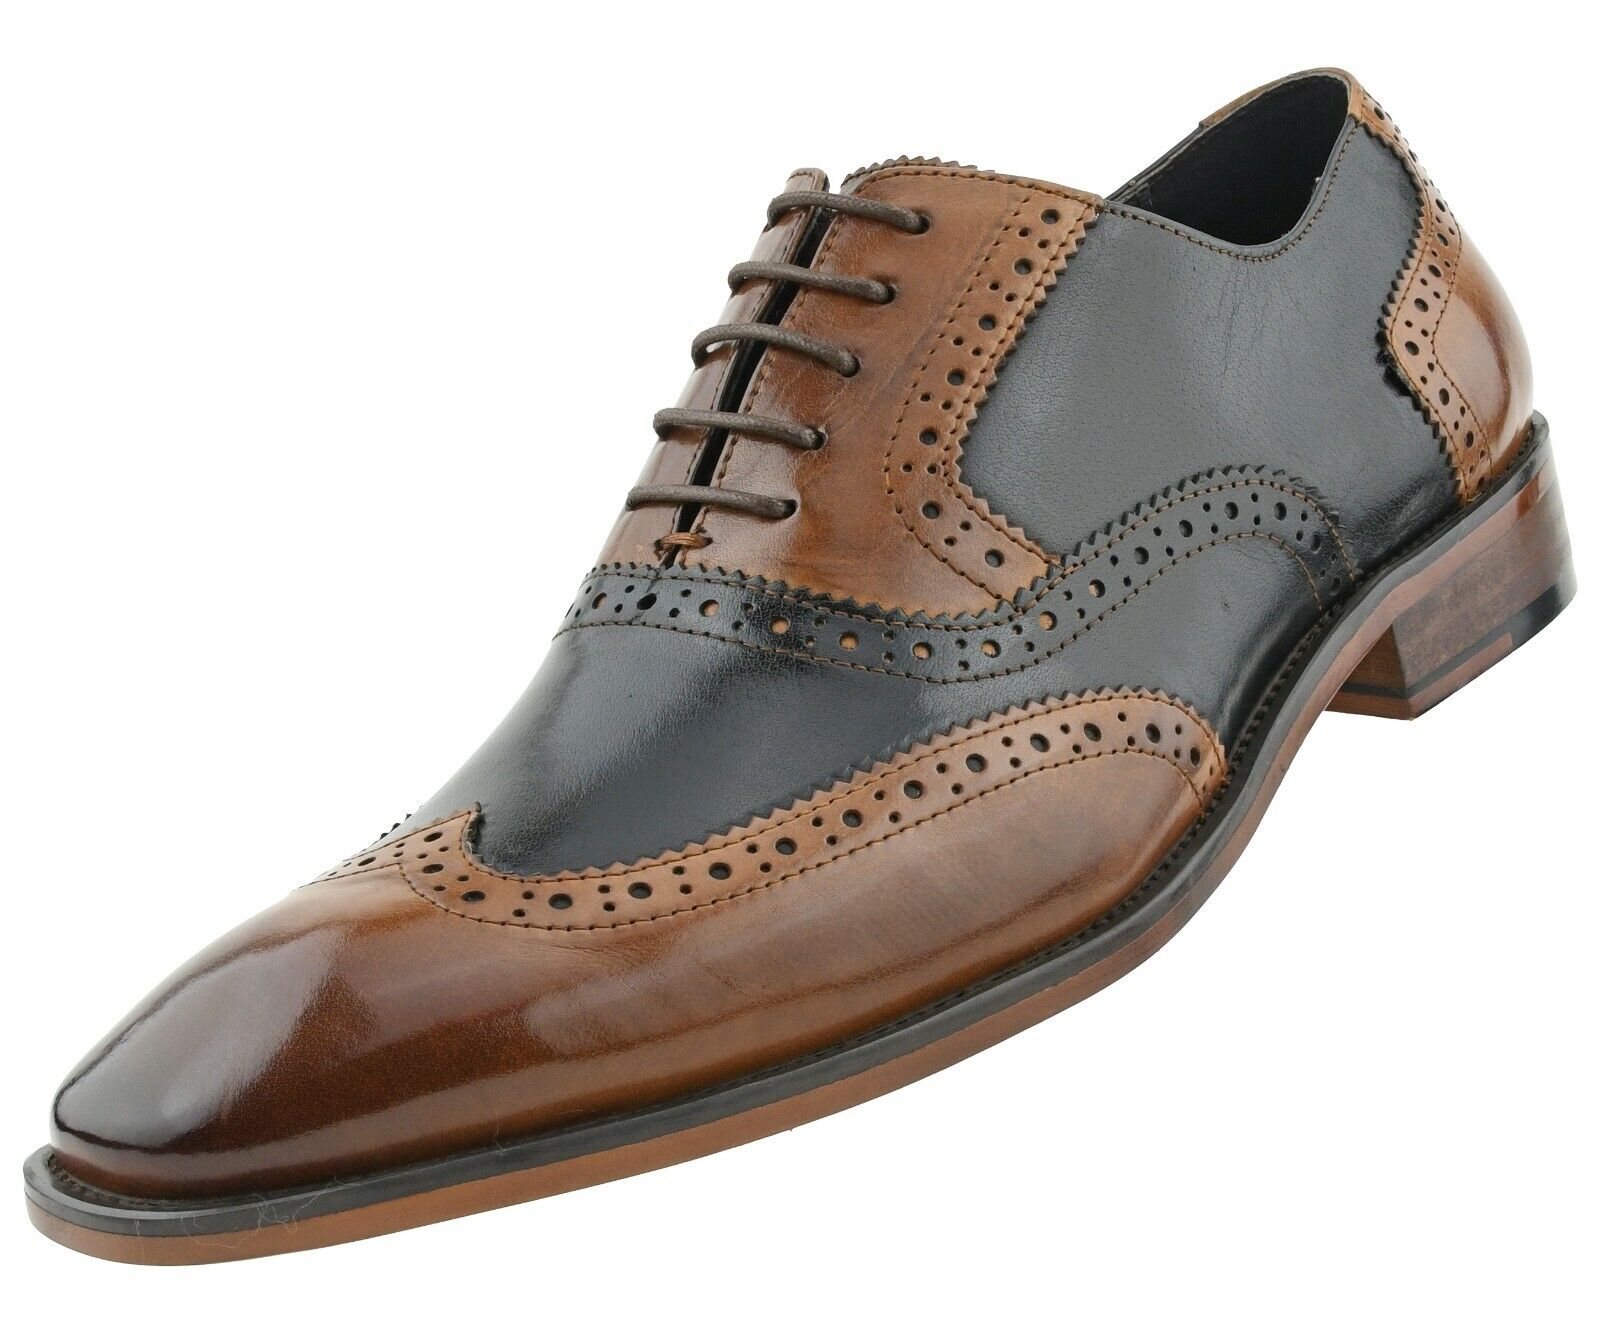 Asher Green Mens Genuine Leather Perforated Wingtip Oxfords Lace Up Dress Shoes